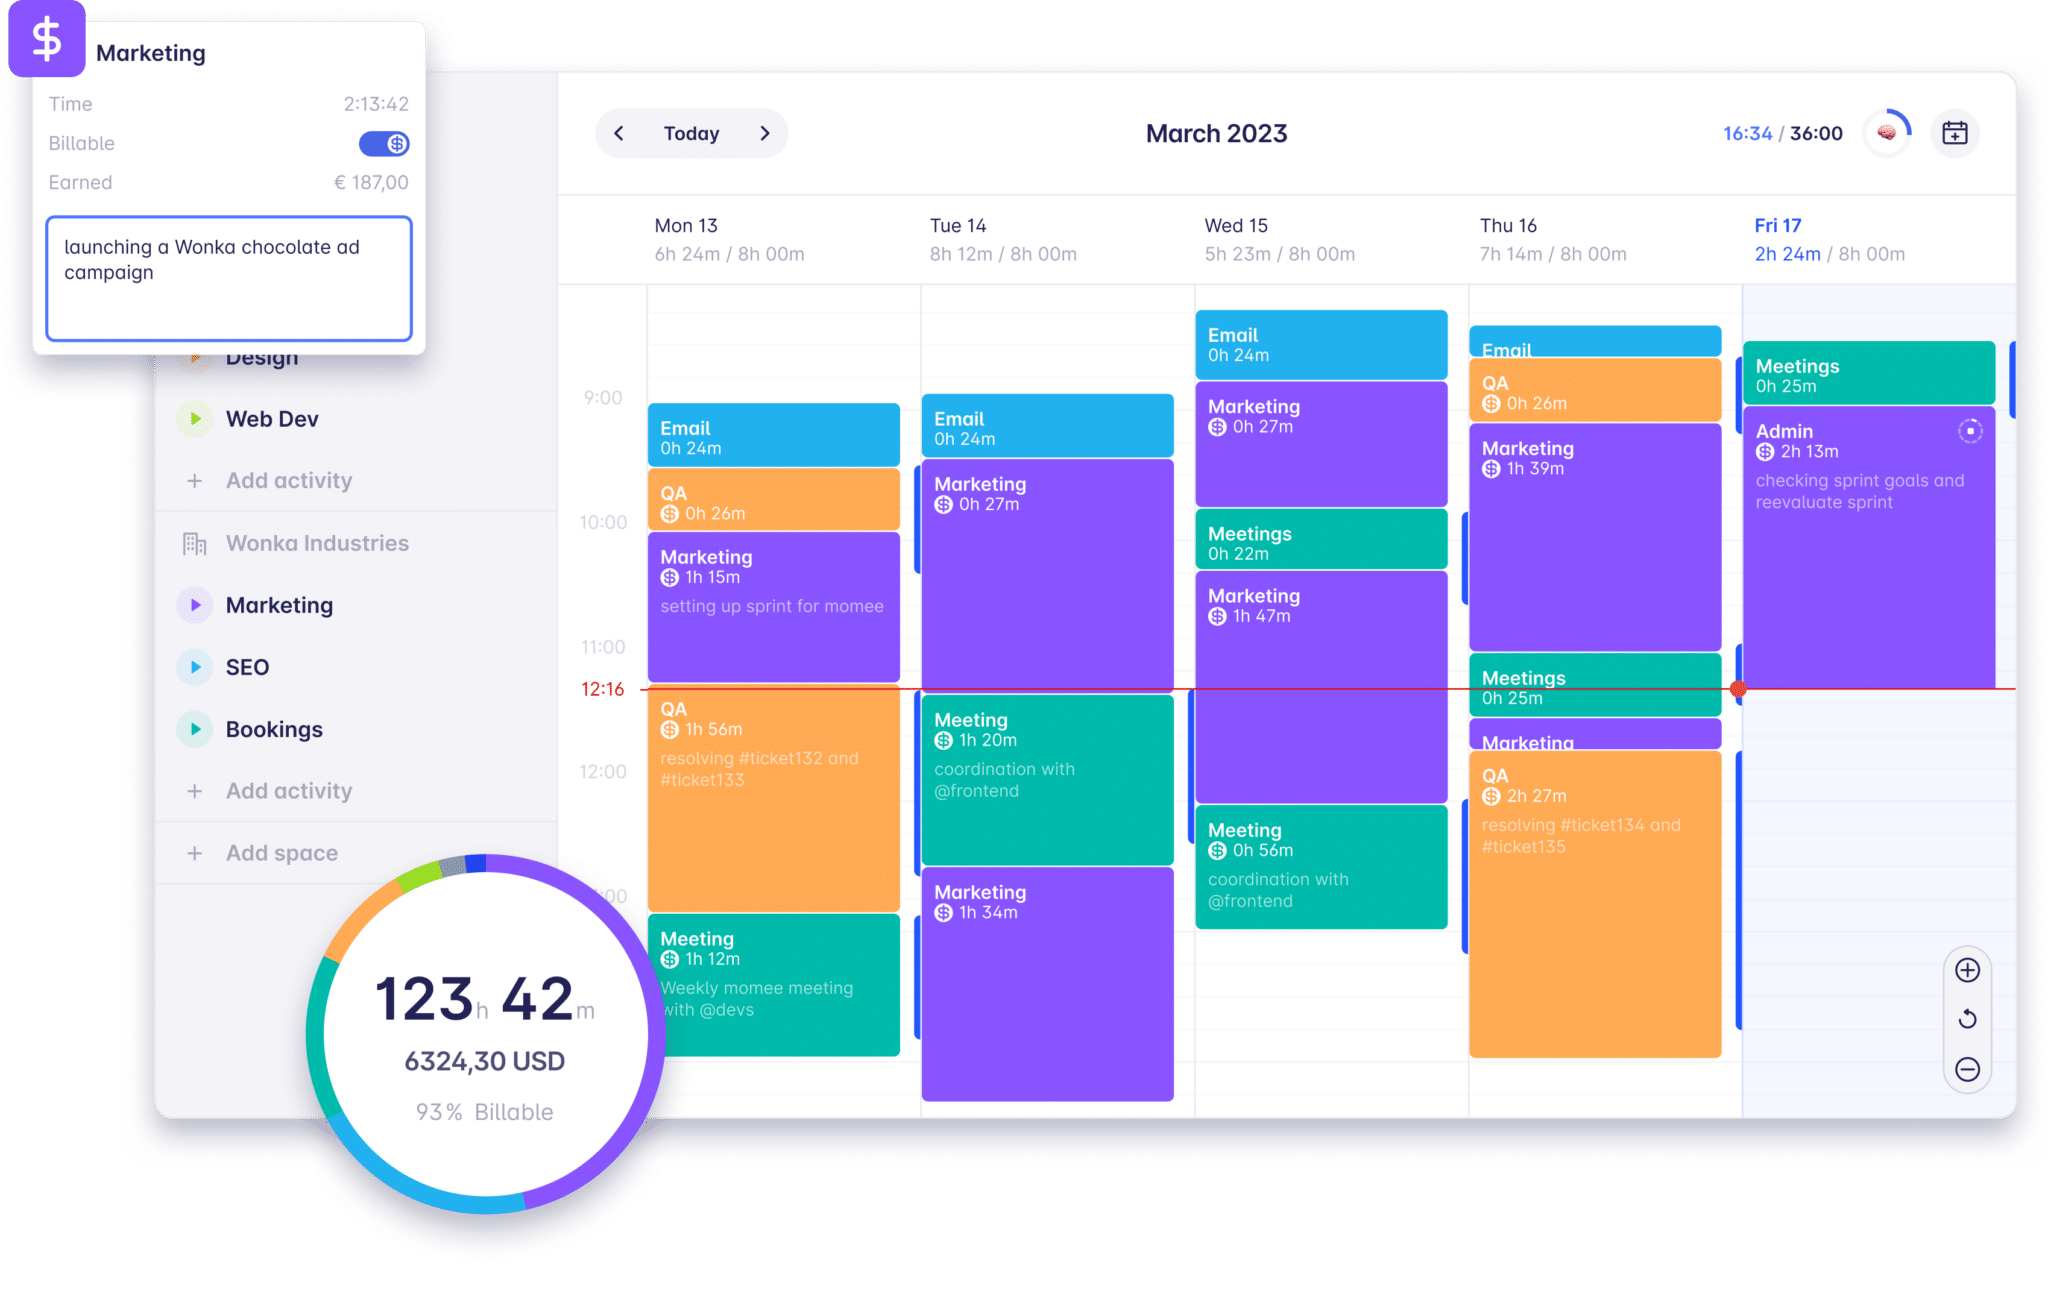 25+ Free Productivity Tools for Developers [2021]